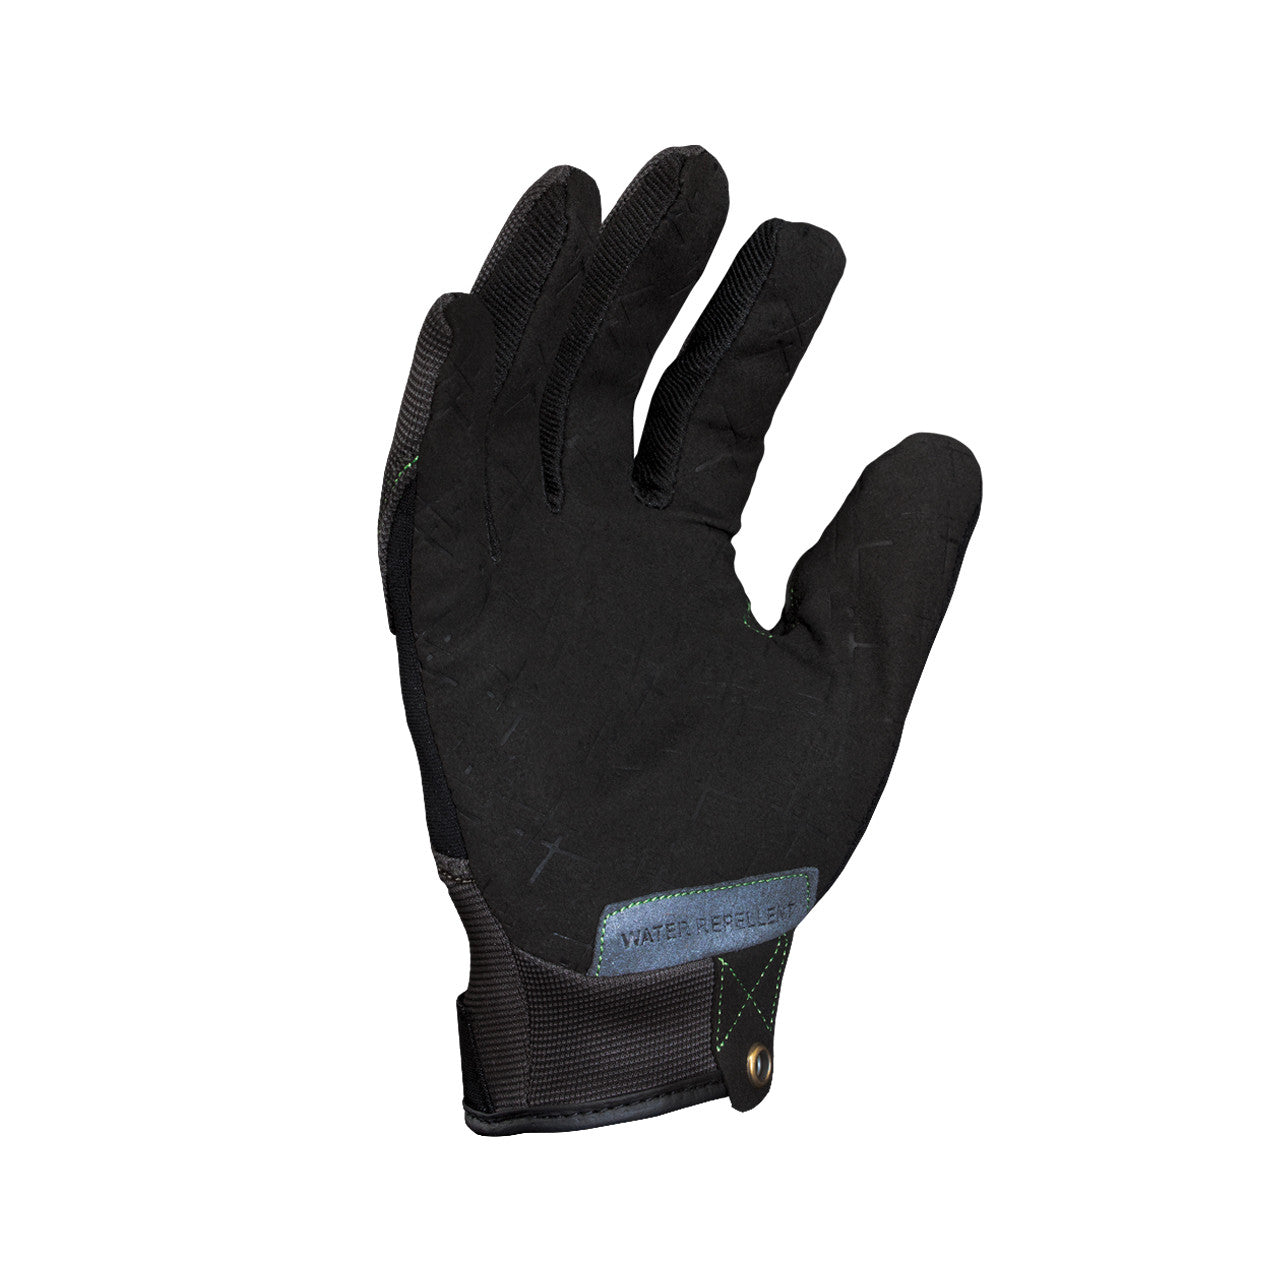 Ironclad EXO™ Water Resistant Glove Black-eSafety Supplies, Inc